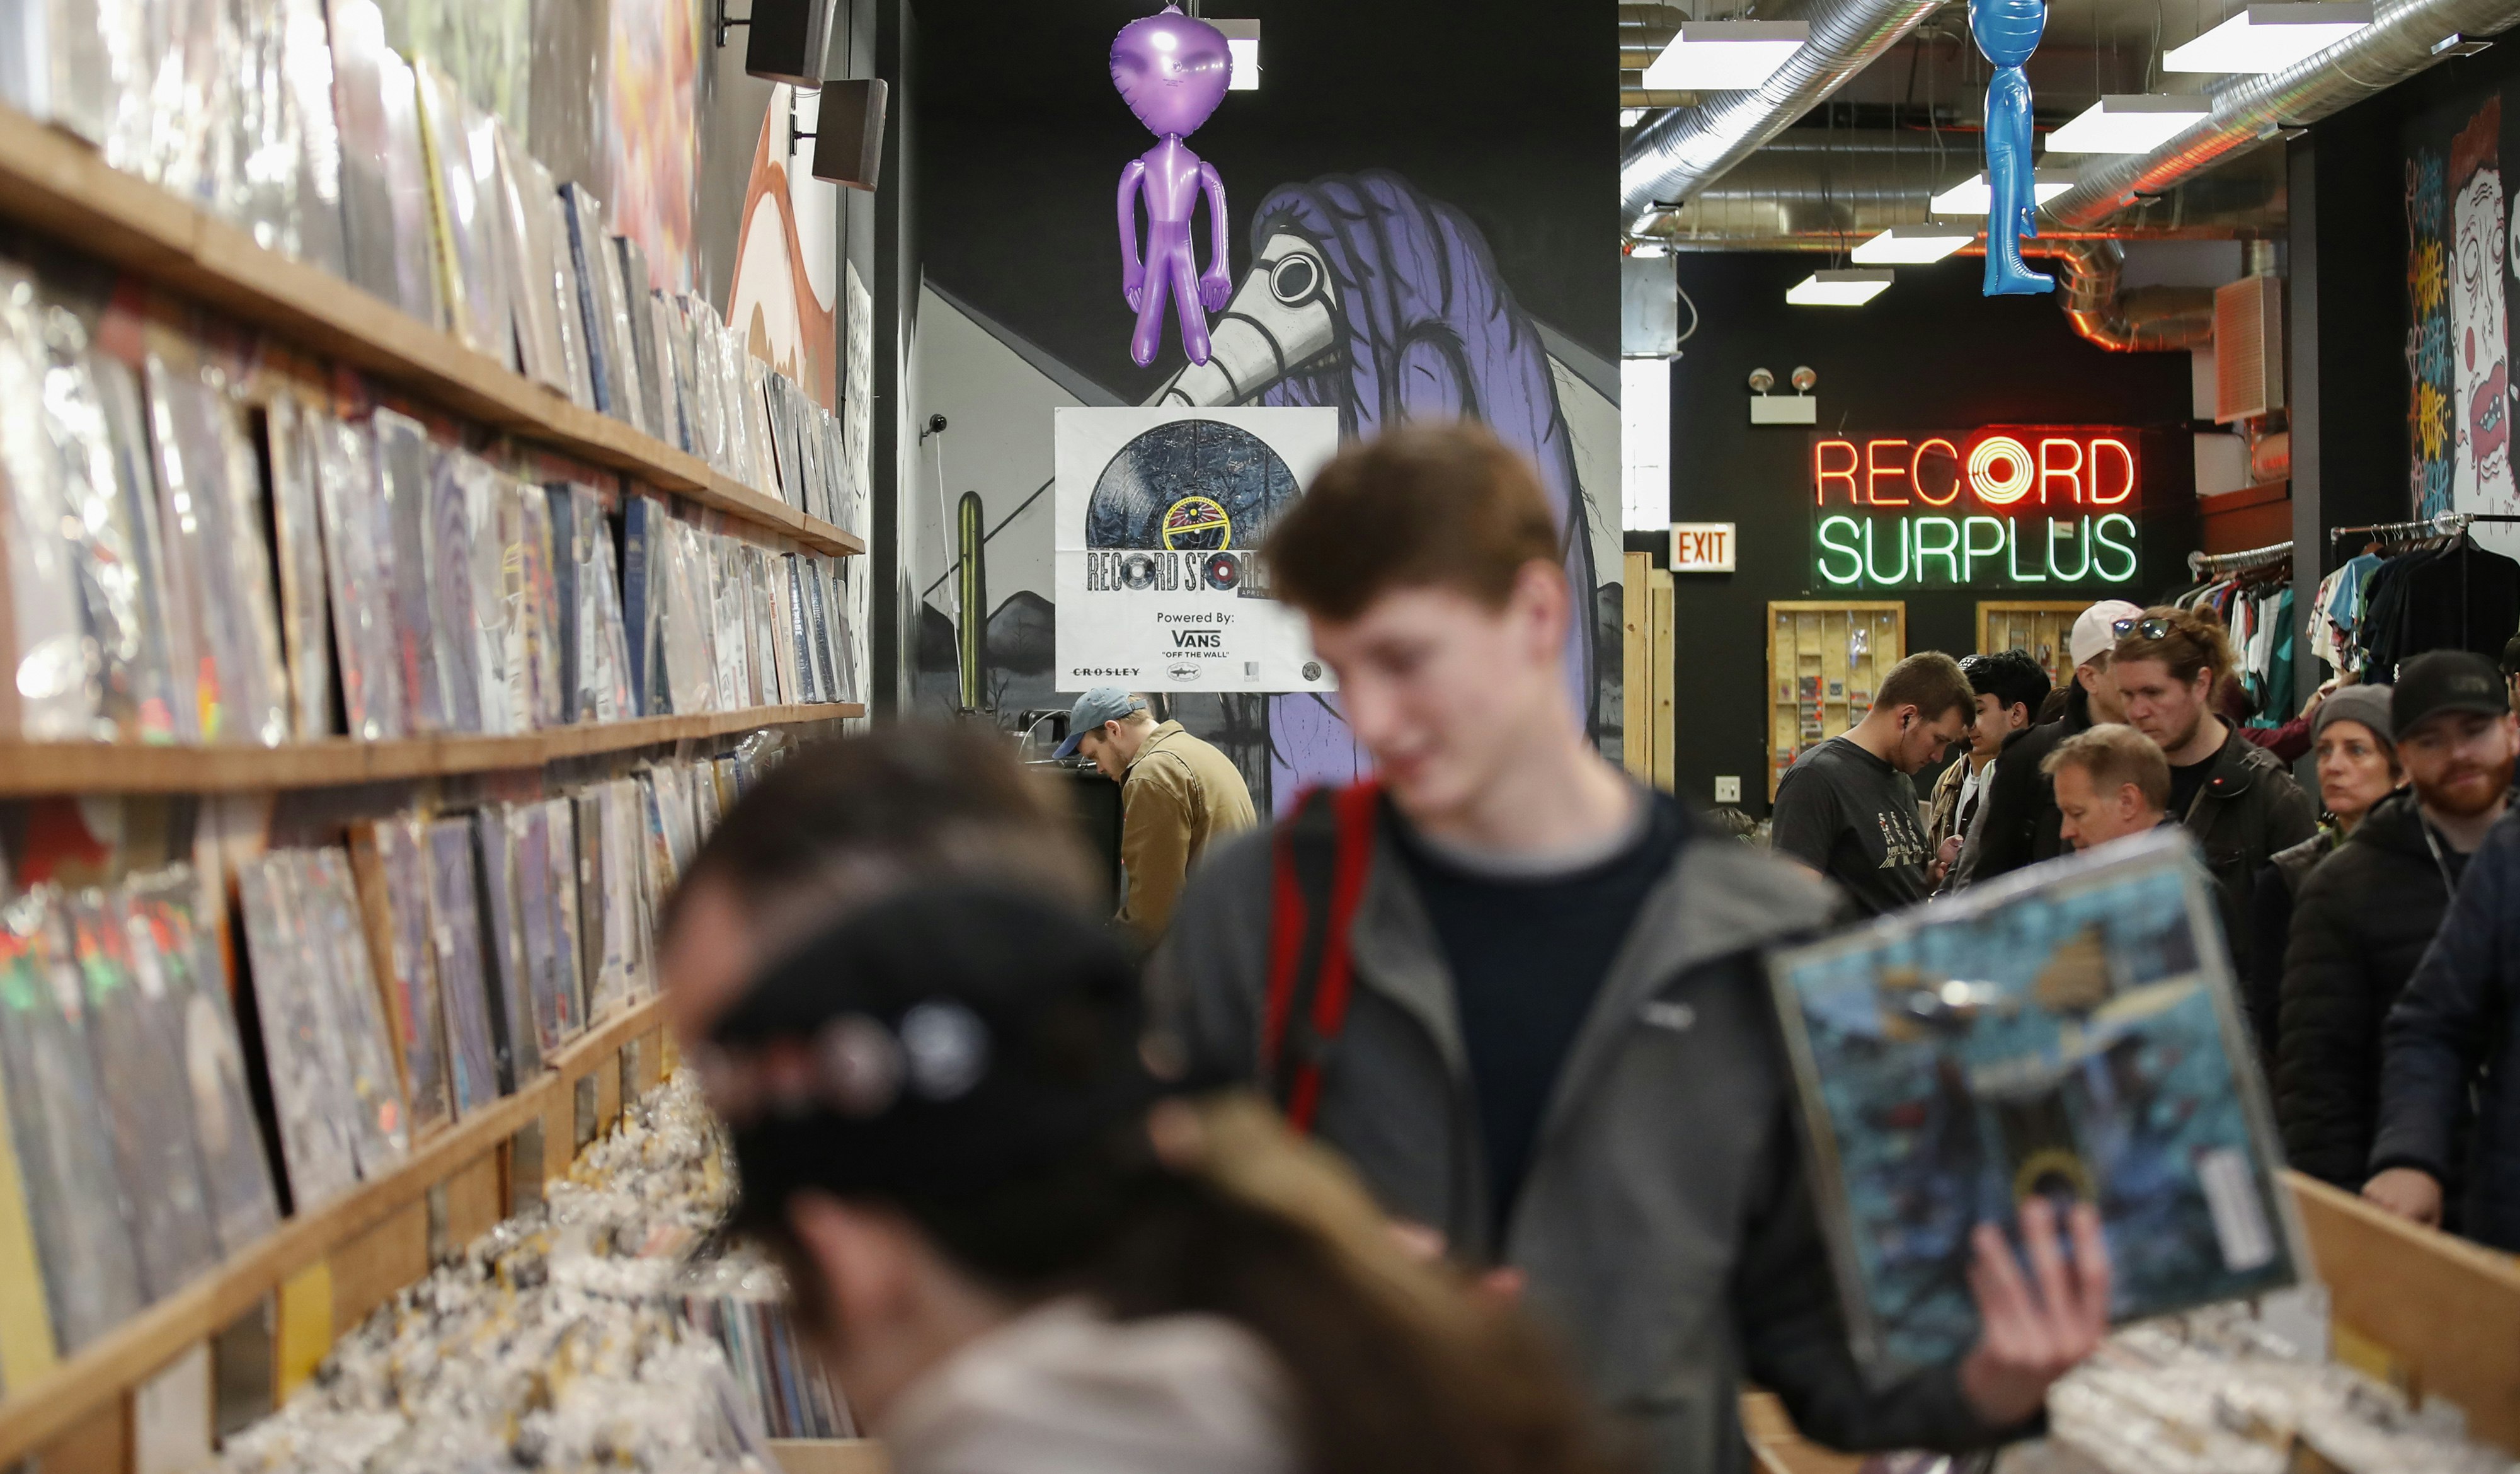 Shoppers sort through bins of albums at Shuga Records. In the center of the image is a young man with red hair in a grey hoodie with a red backpack holding a blue album. In focus behind him is a purple mural, a purple inflatable alien toy, and a neon sign in red and green reading "Record Surplus" where the O in Record looks like an album 